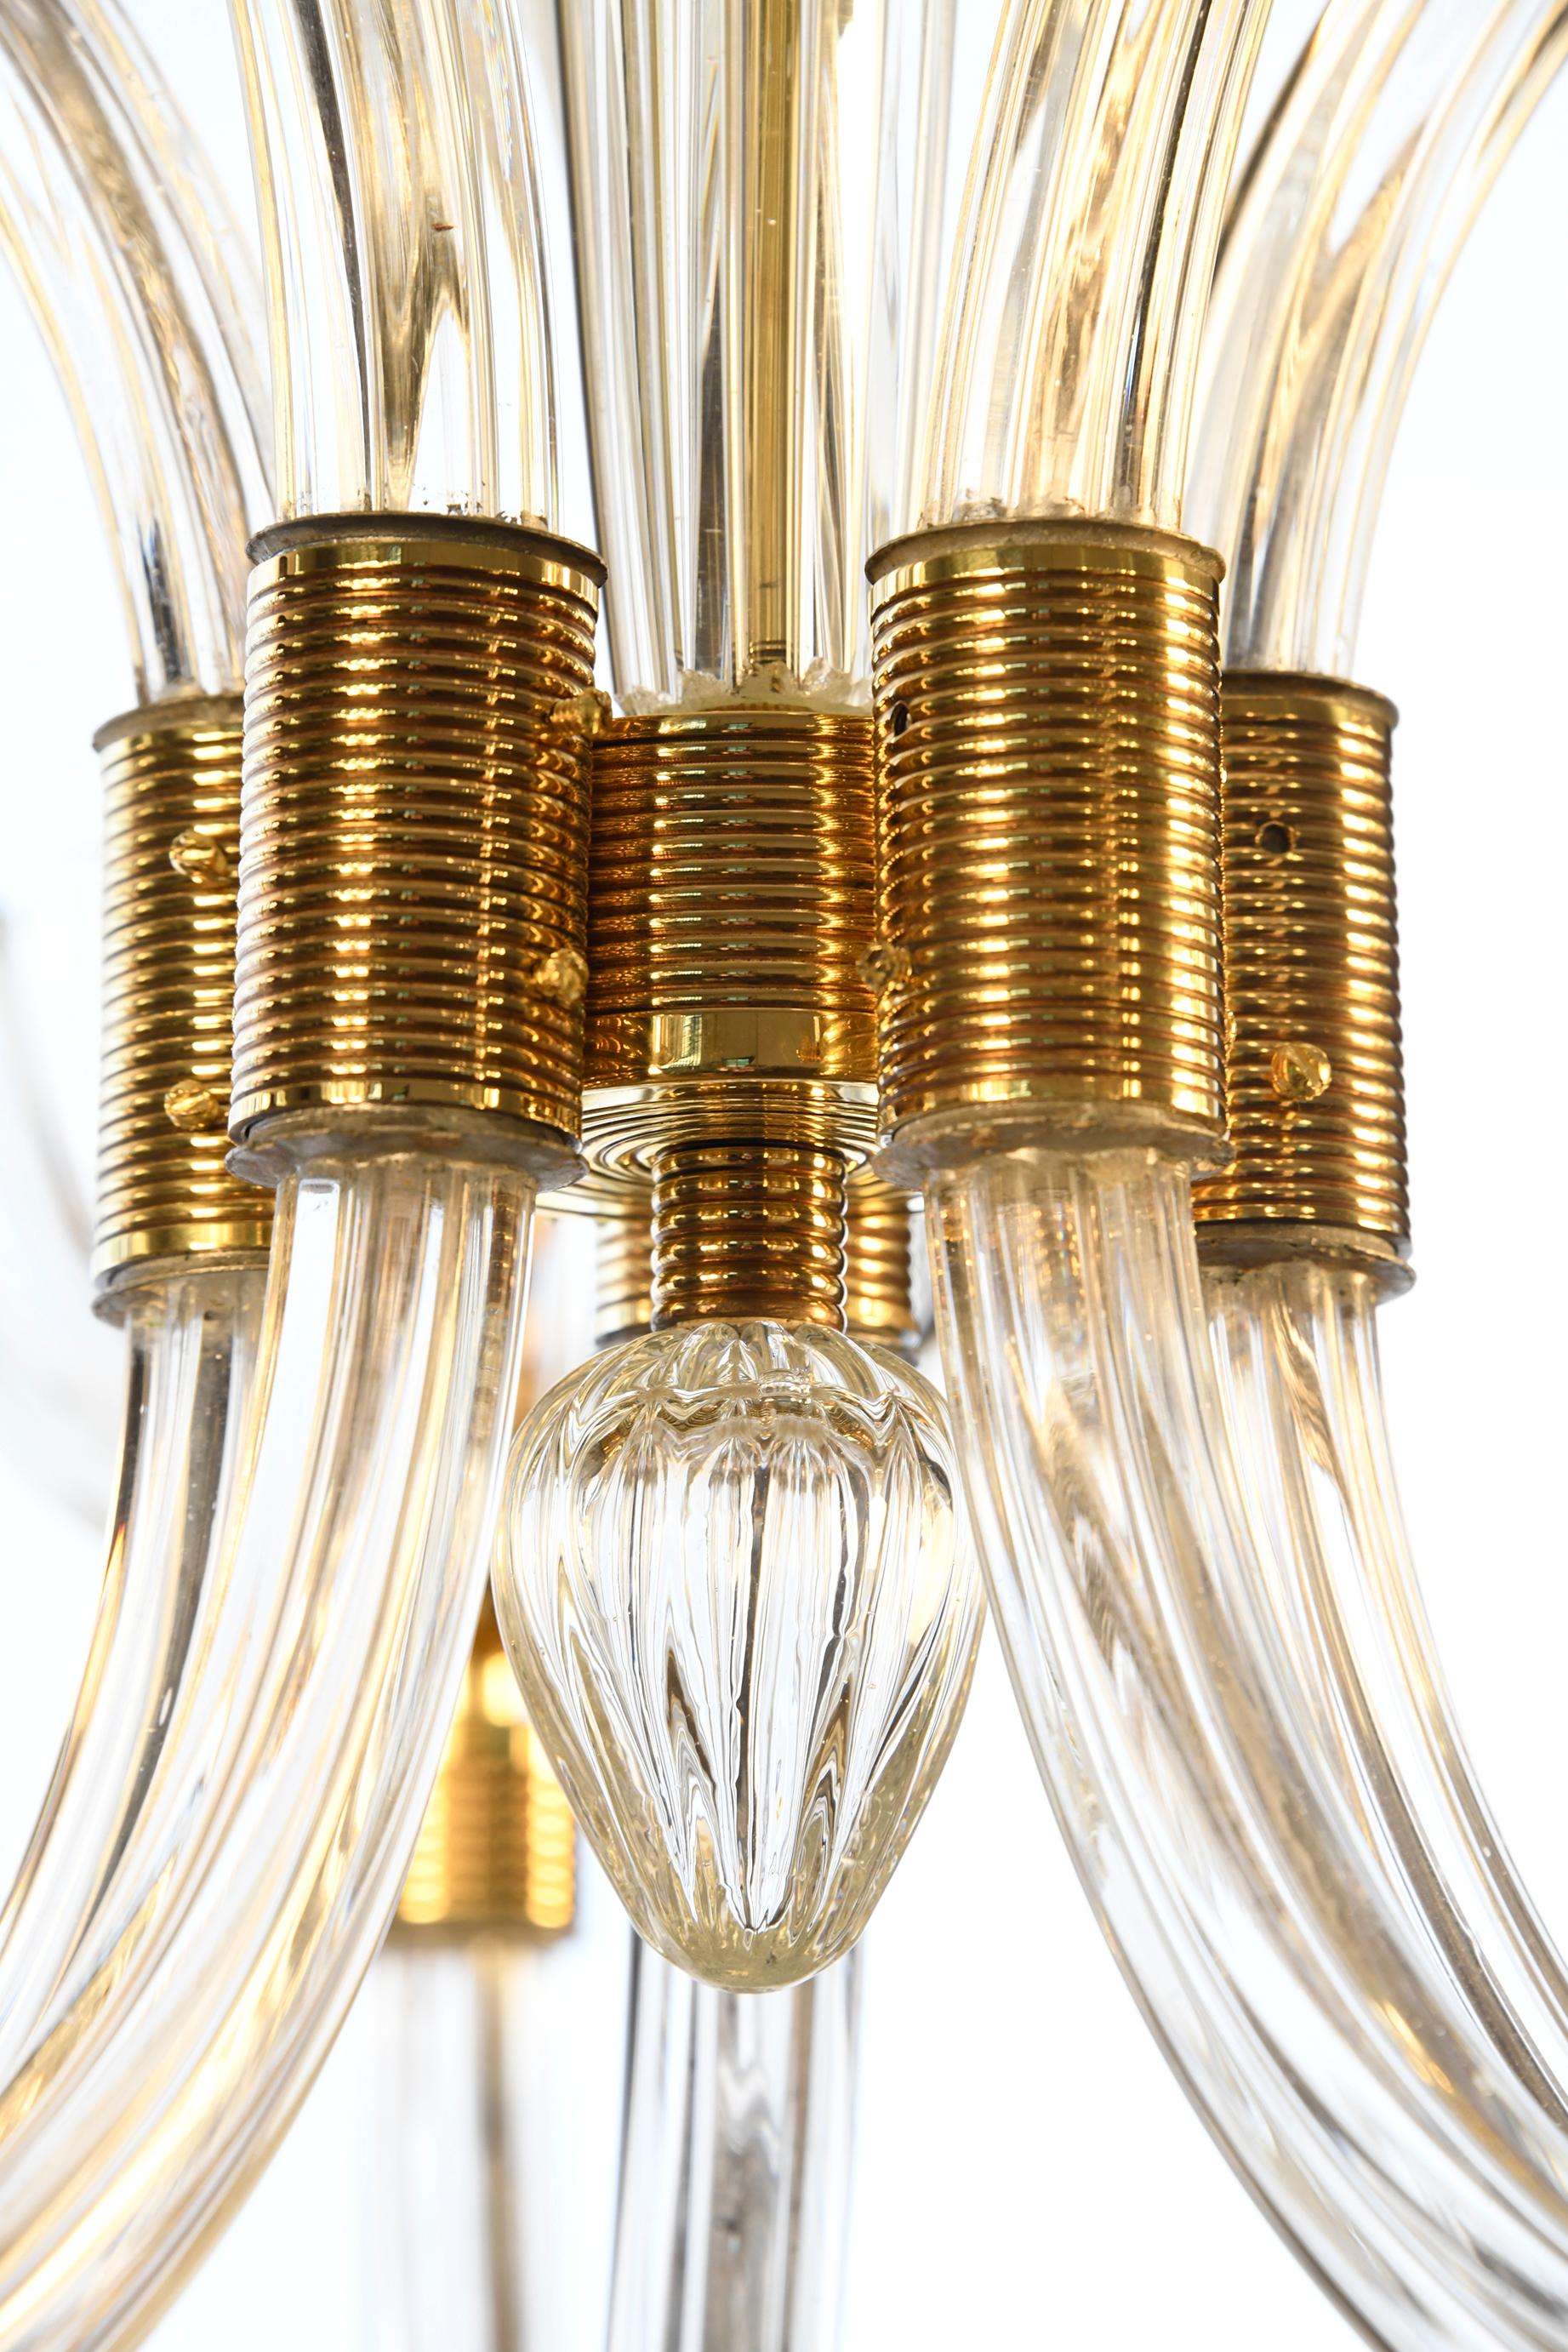 Mid-20th Century Chandelier by Ercole Barovier, 10 Lights, Murano, 1940 For Sale 3